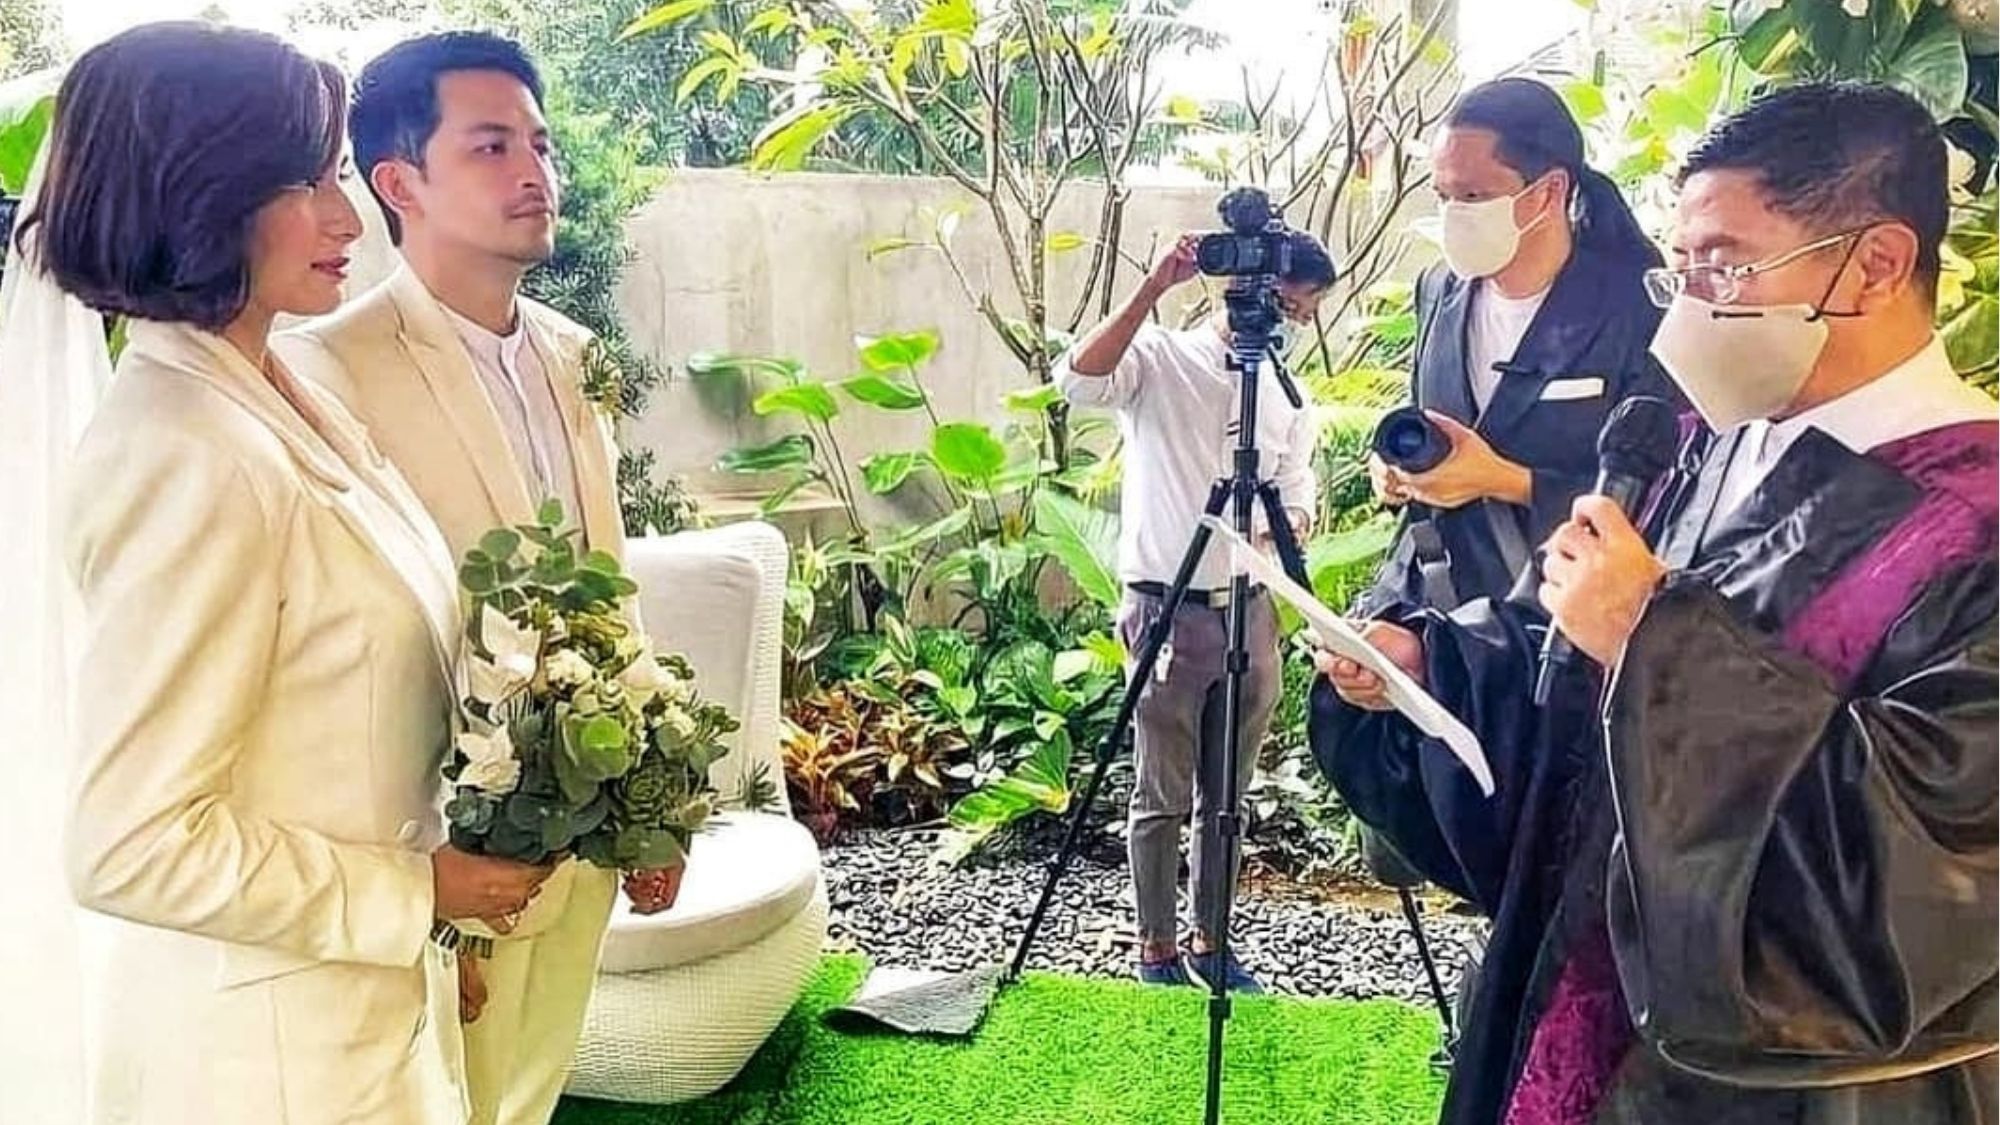 Finally! Jennylyn Mercado and Dennis Trillo tie the knot gmanetwork (2)